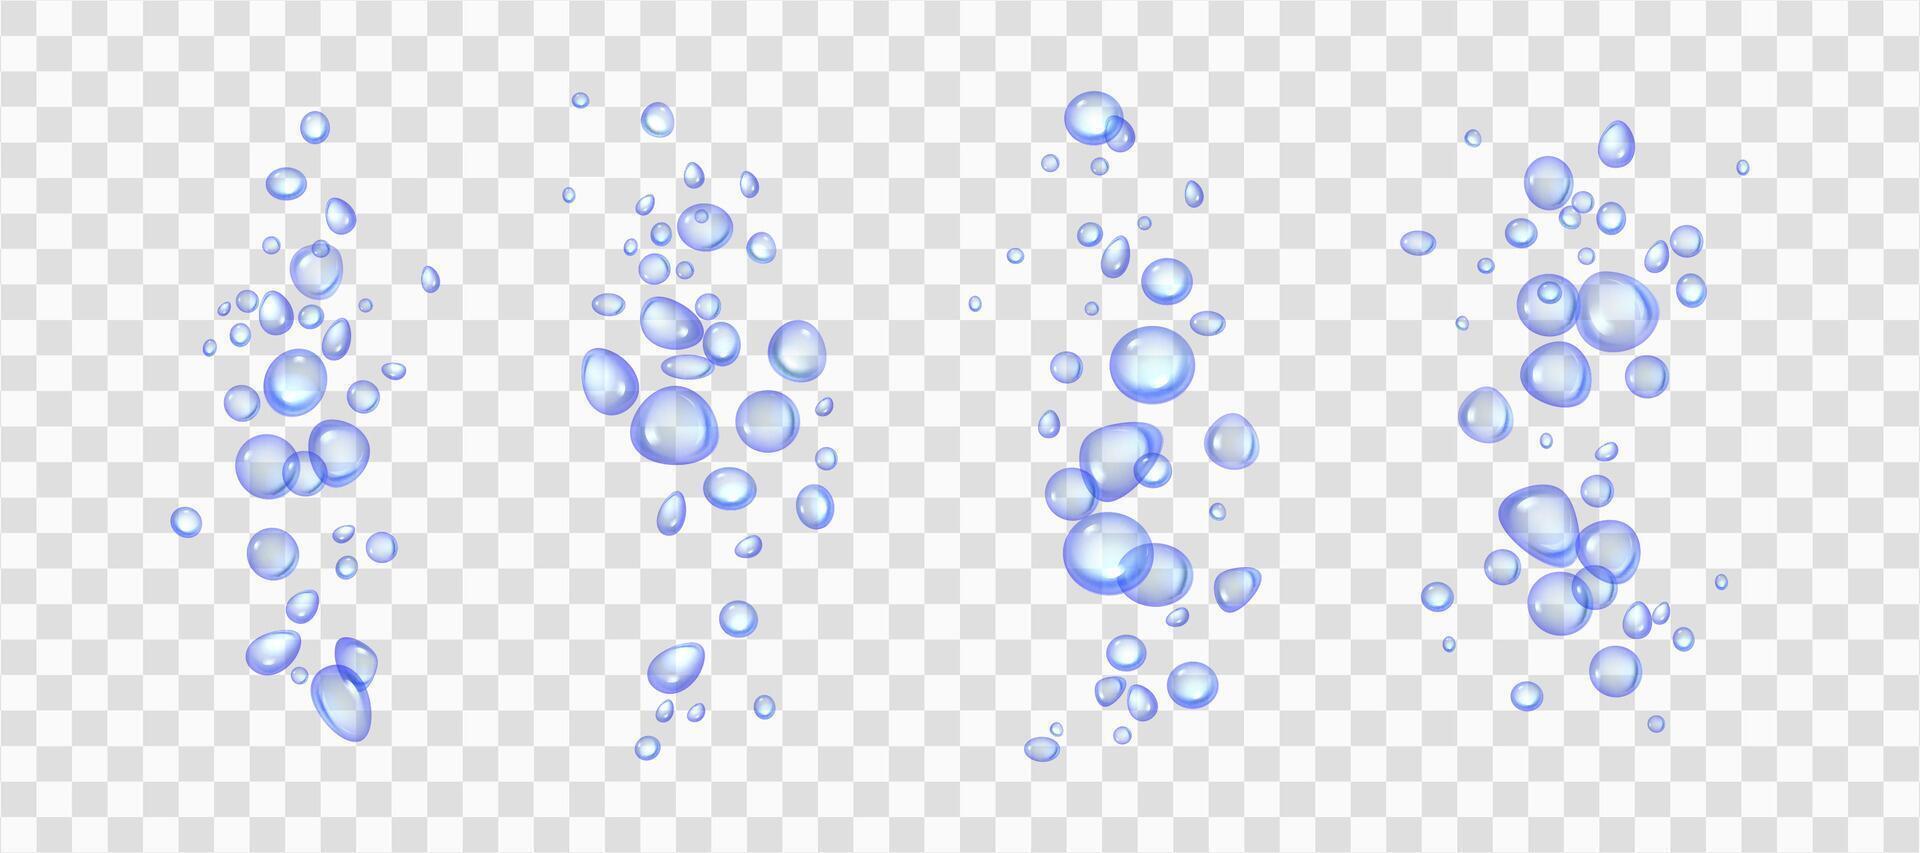 Effervescent water or oxygen fizz, blue air bubbles realistic 3d illustration. Moving underwater fizzing on transparent background. Soda or carbonated drink design elements. Dynamic aqua motion vector